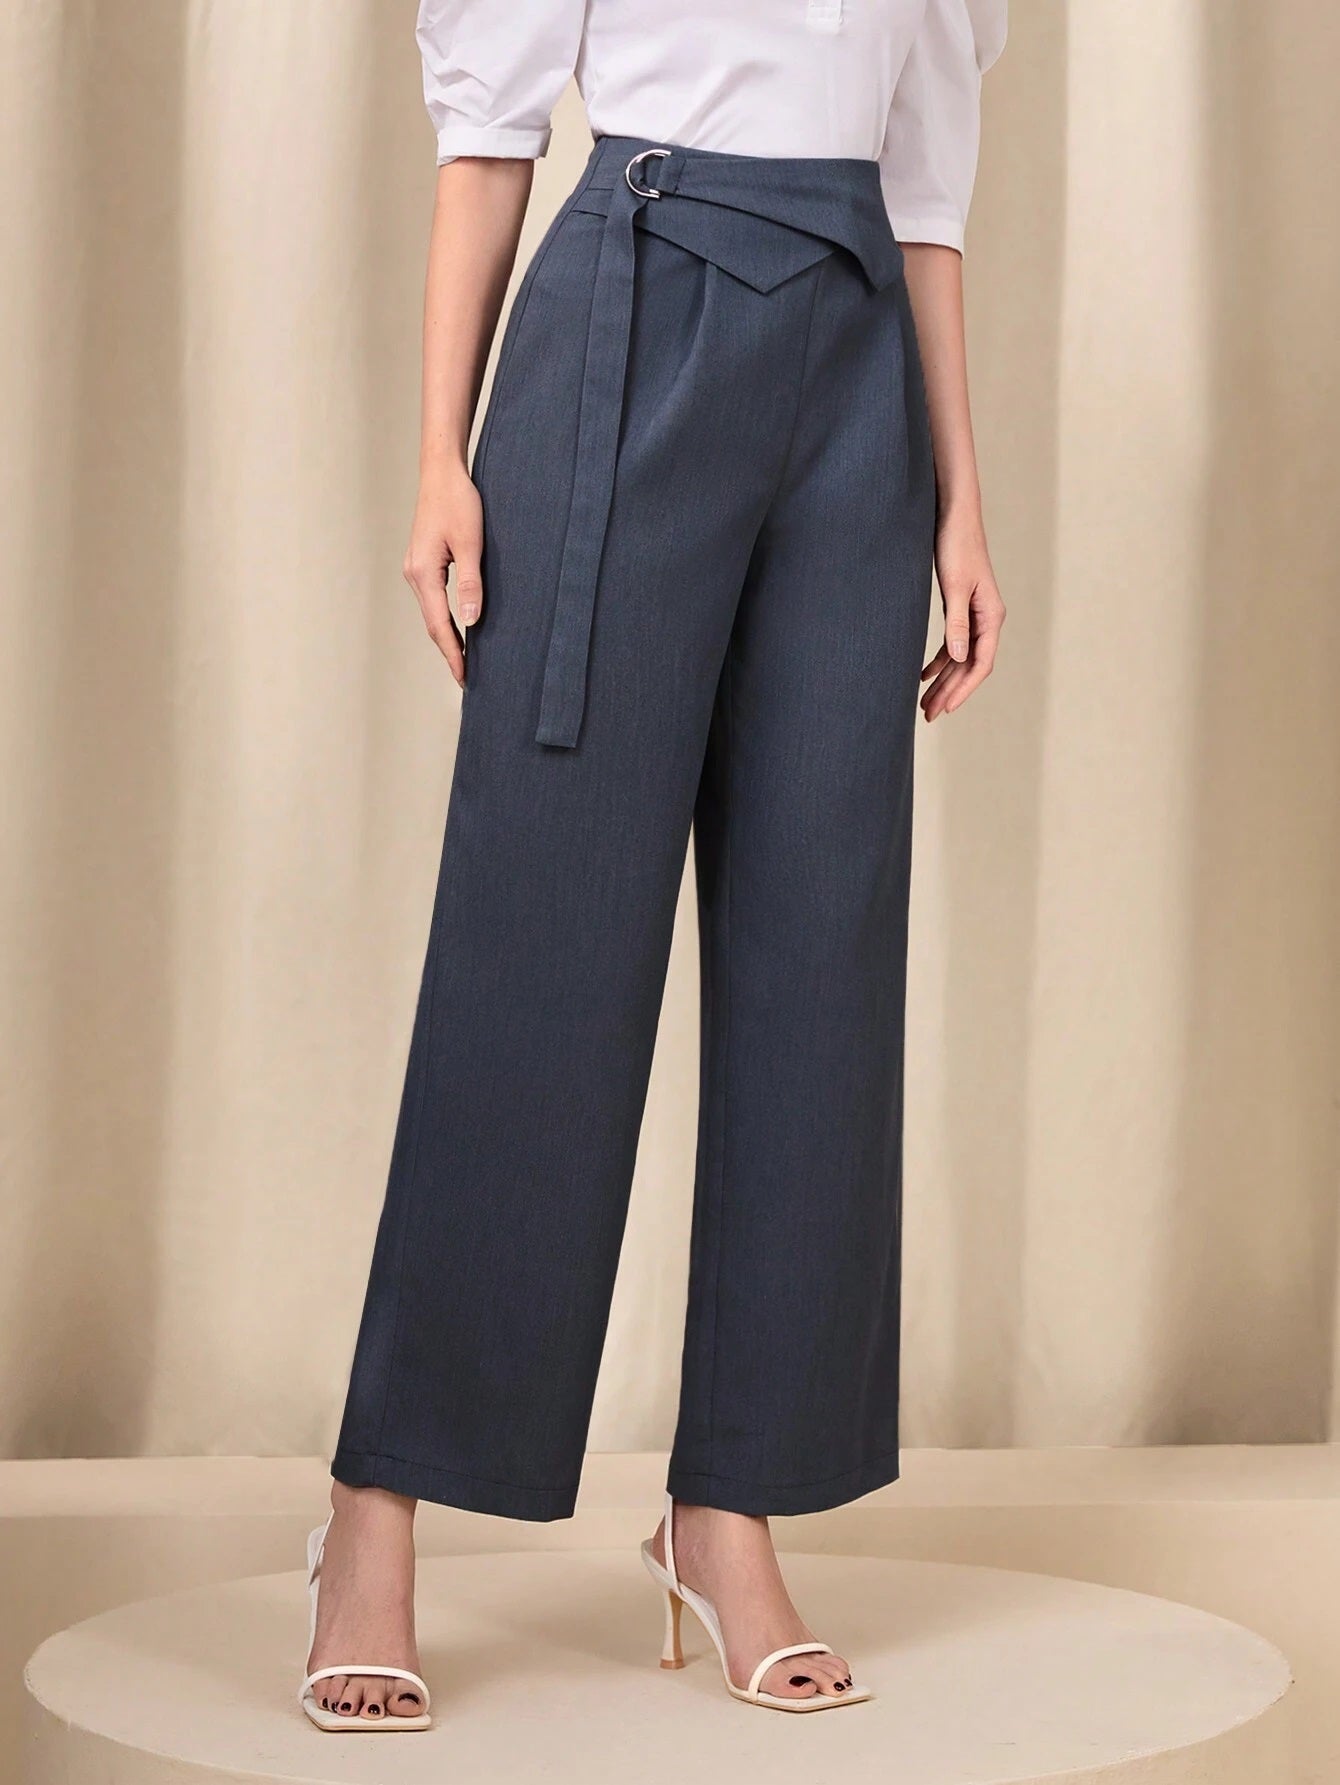 CM-BS884465 Women Casual Seoul Style Solid Flipped Waisted Straight Leg Pants - Dark Gray